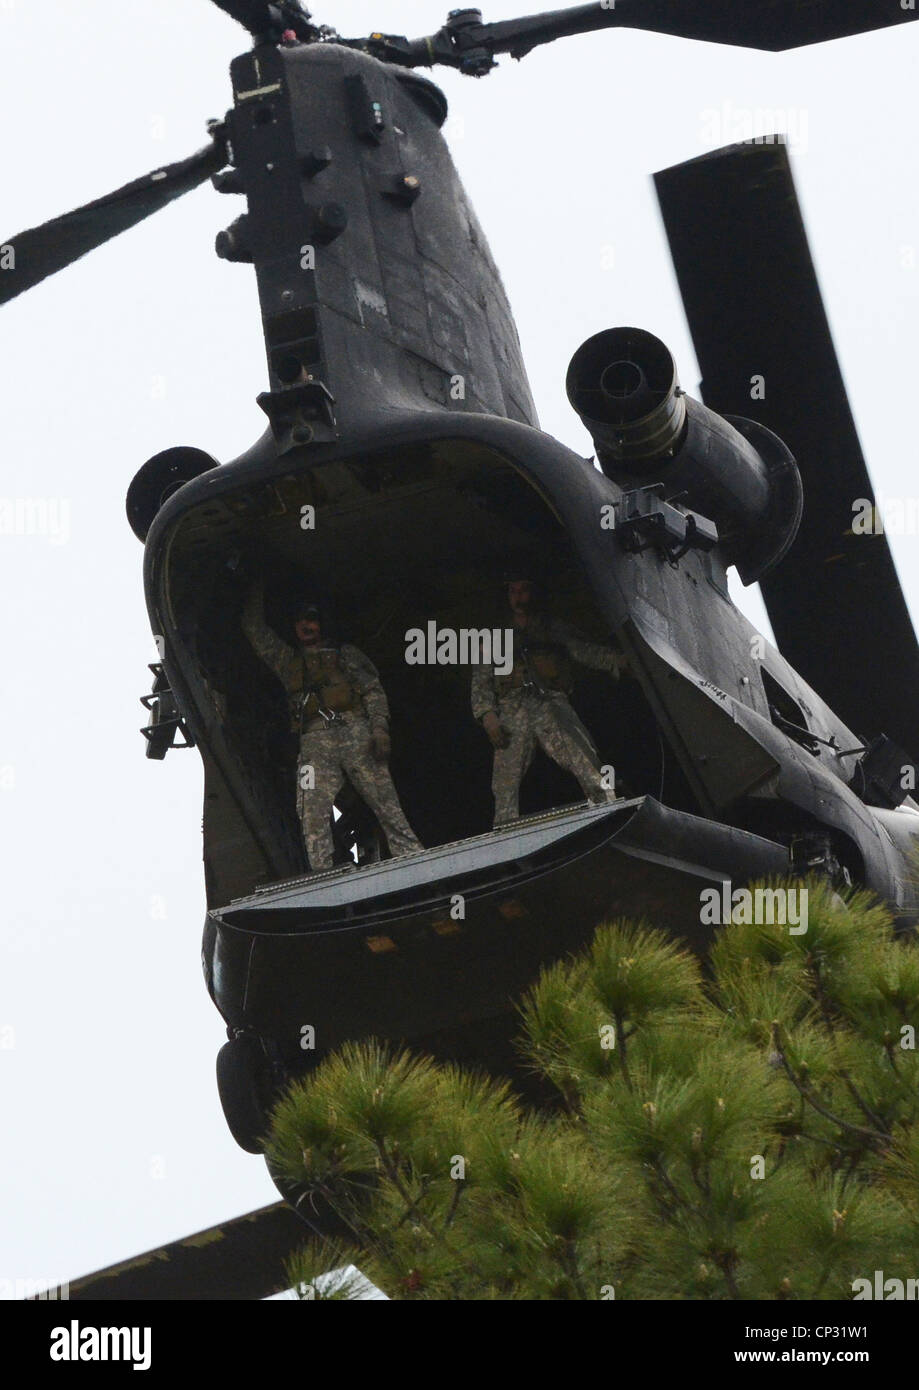 US Special Operations Forces demonstration a direct action raid during a display of the range of US Army Special Operations capabilities April 25, 2012 at Fort Bragg, N.C. Stock Photo